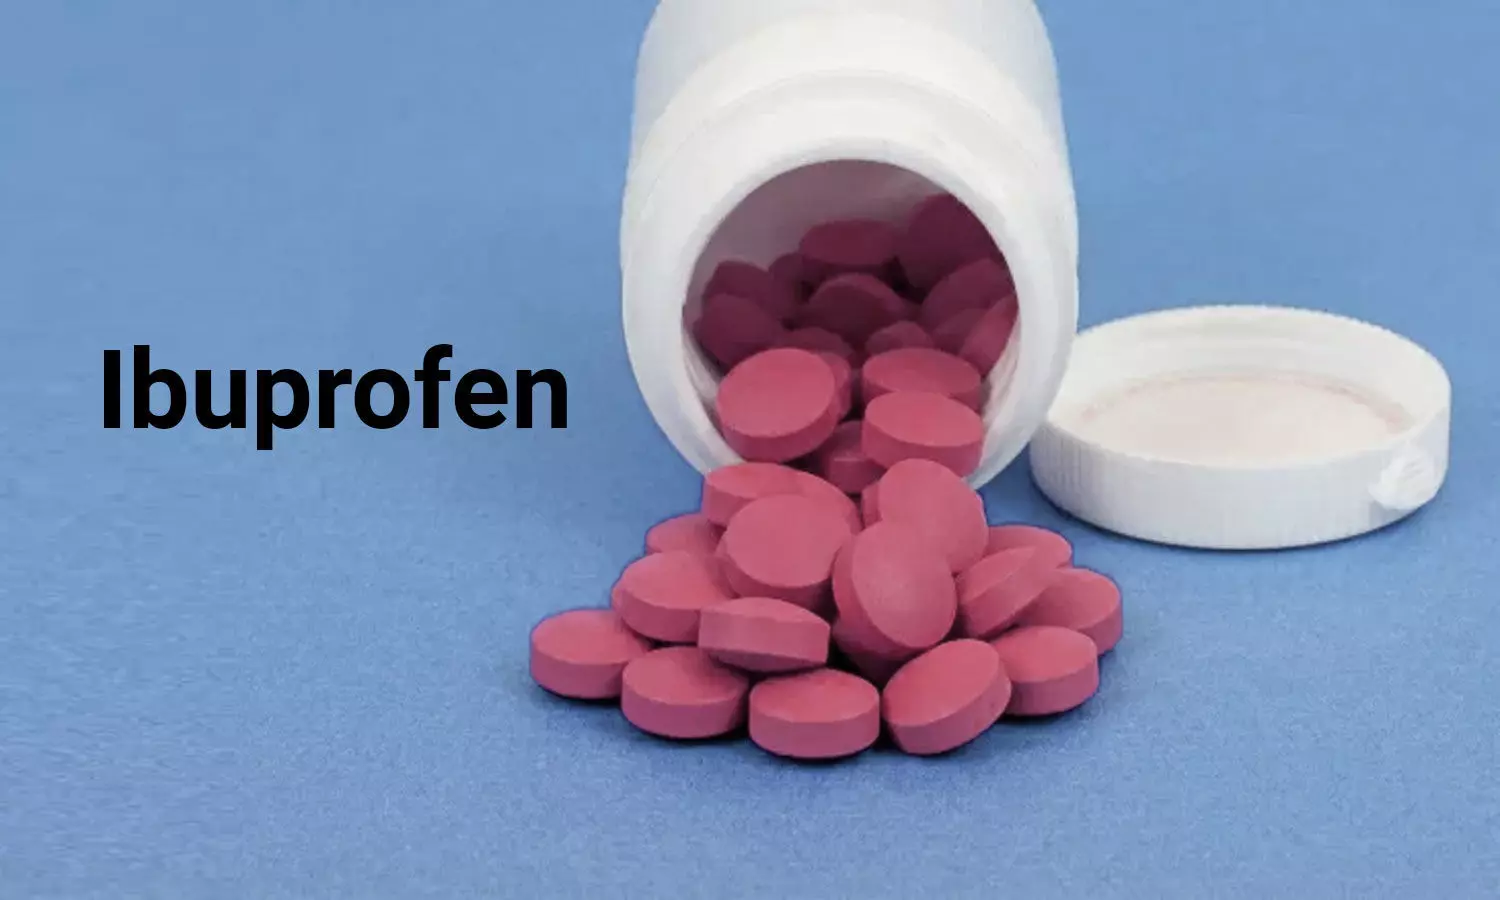 Ibuprofen safe for use in children with G6PD deficiency new study  shows